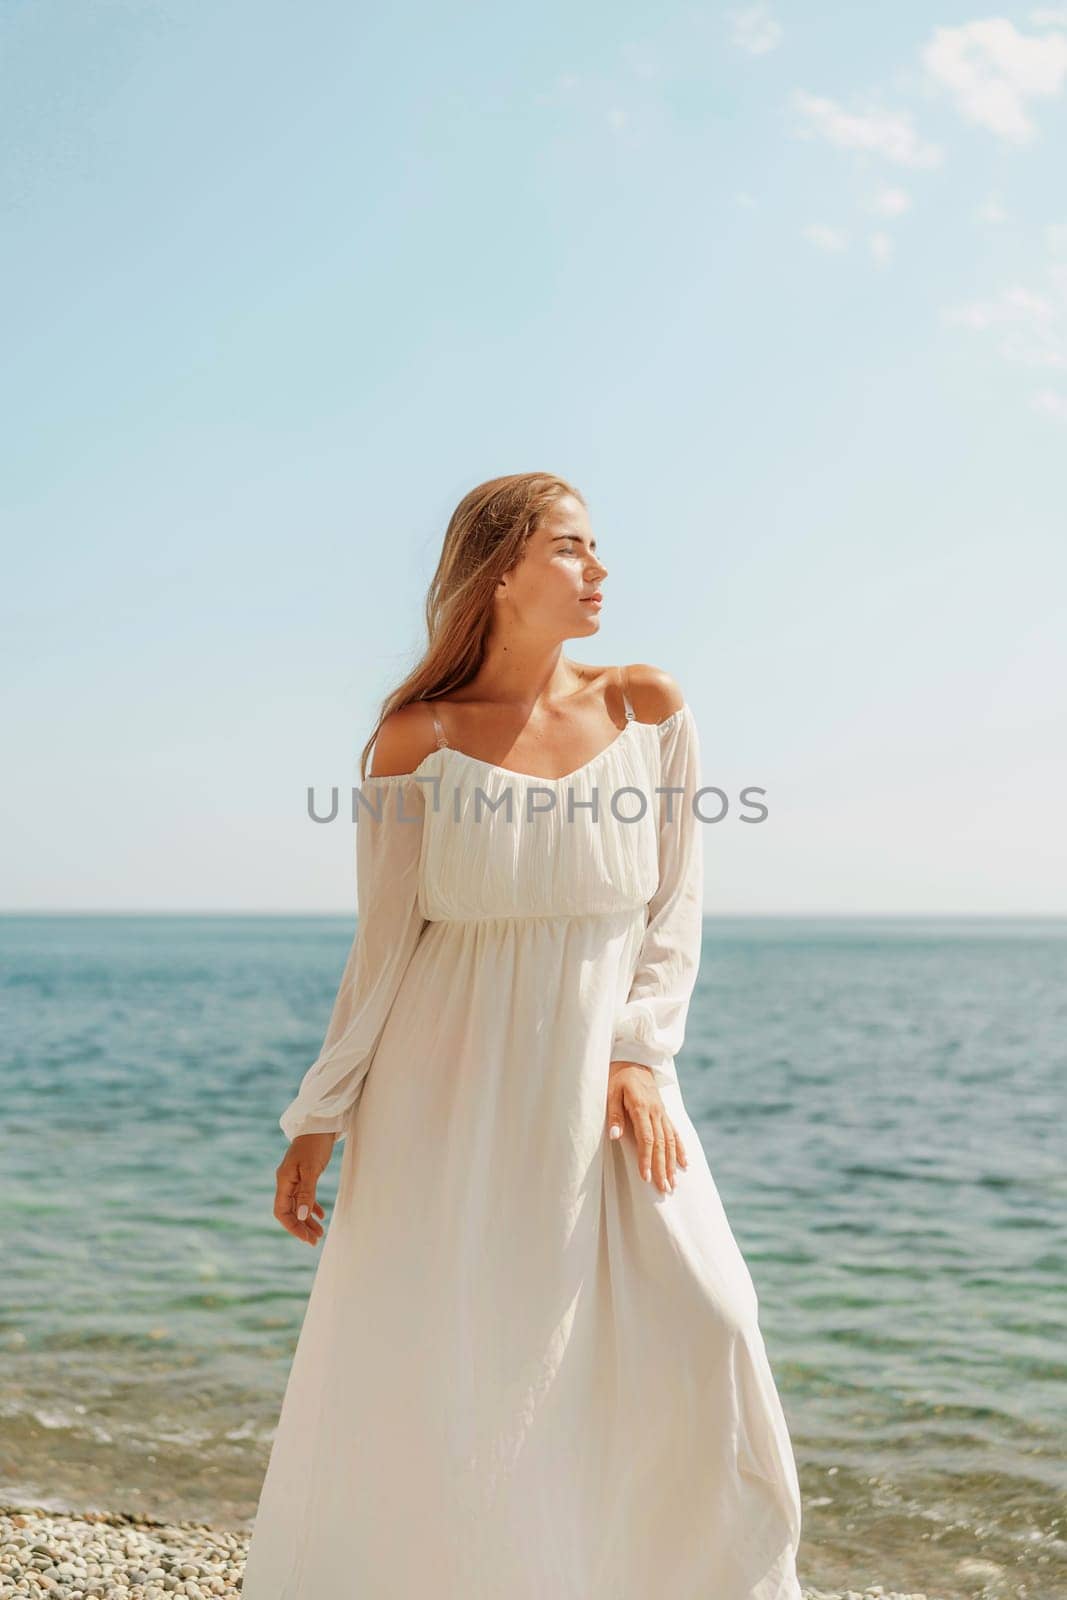 woman white dress stands on a beach, looking out at the ocean. She is in a contemplative or reflective mood, as she raises her hands above her head. Concept of peace and tranquility